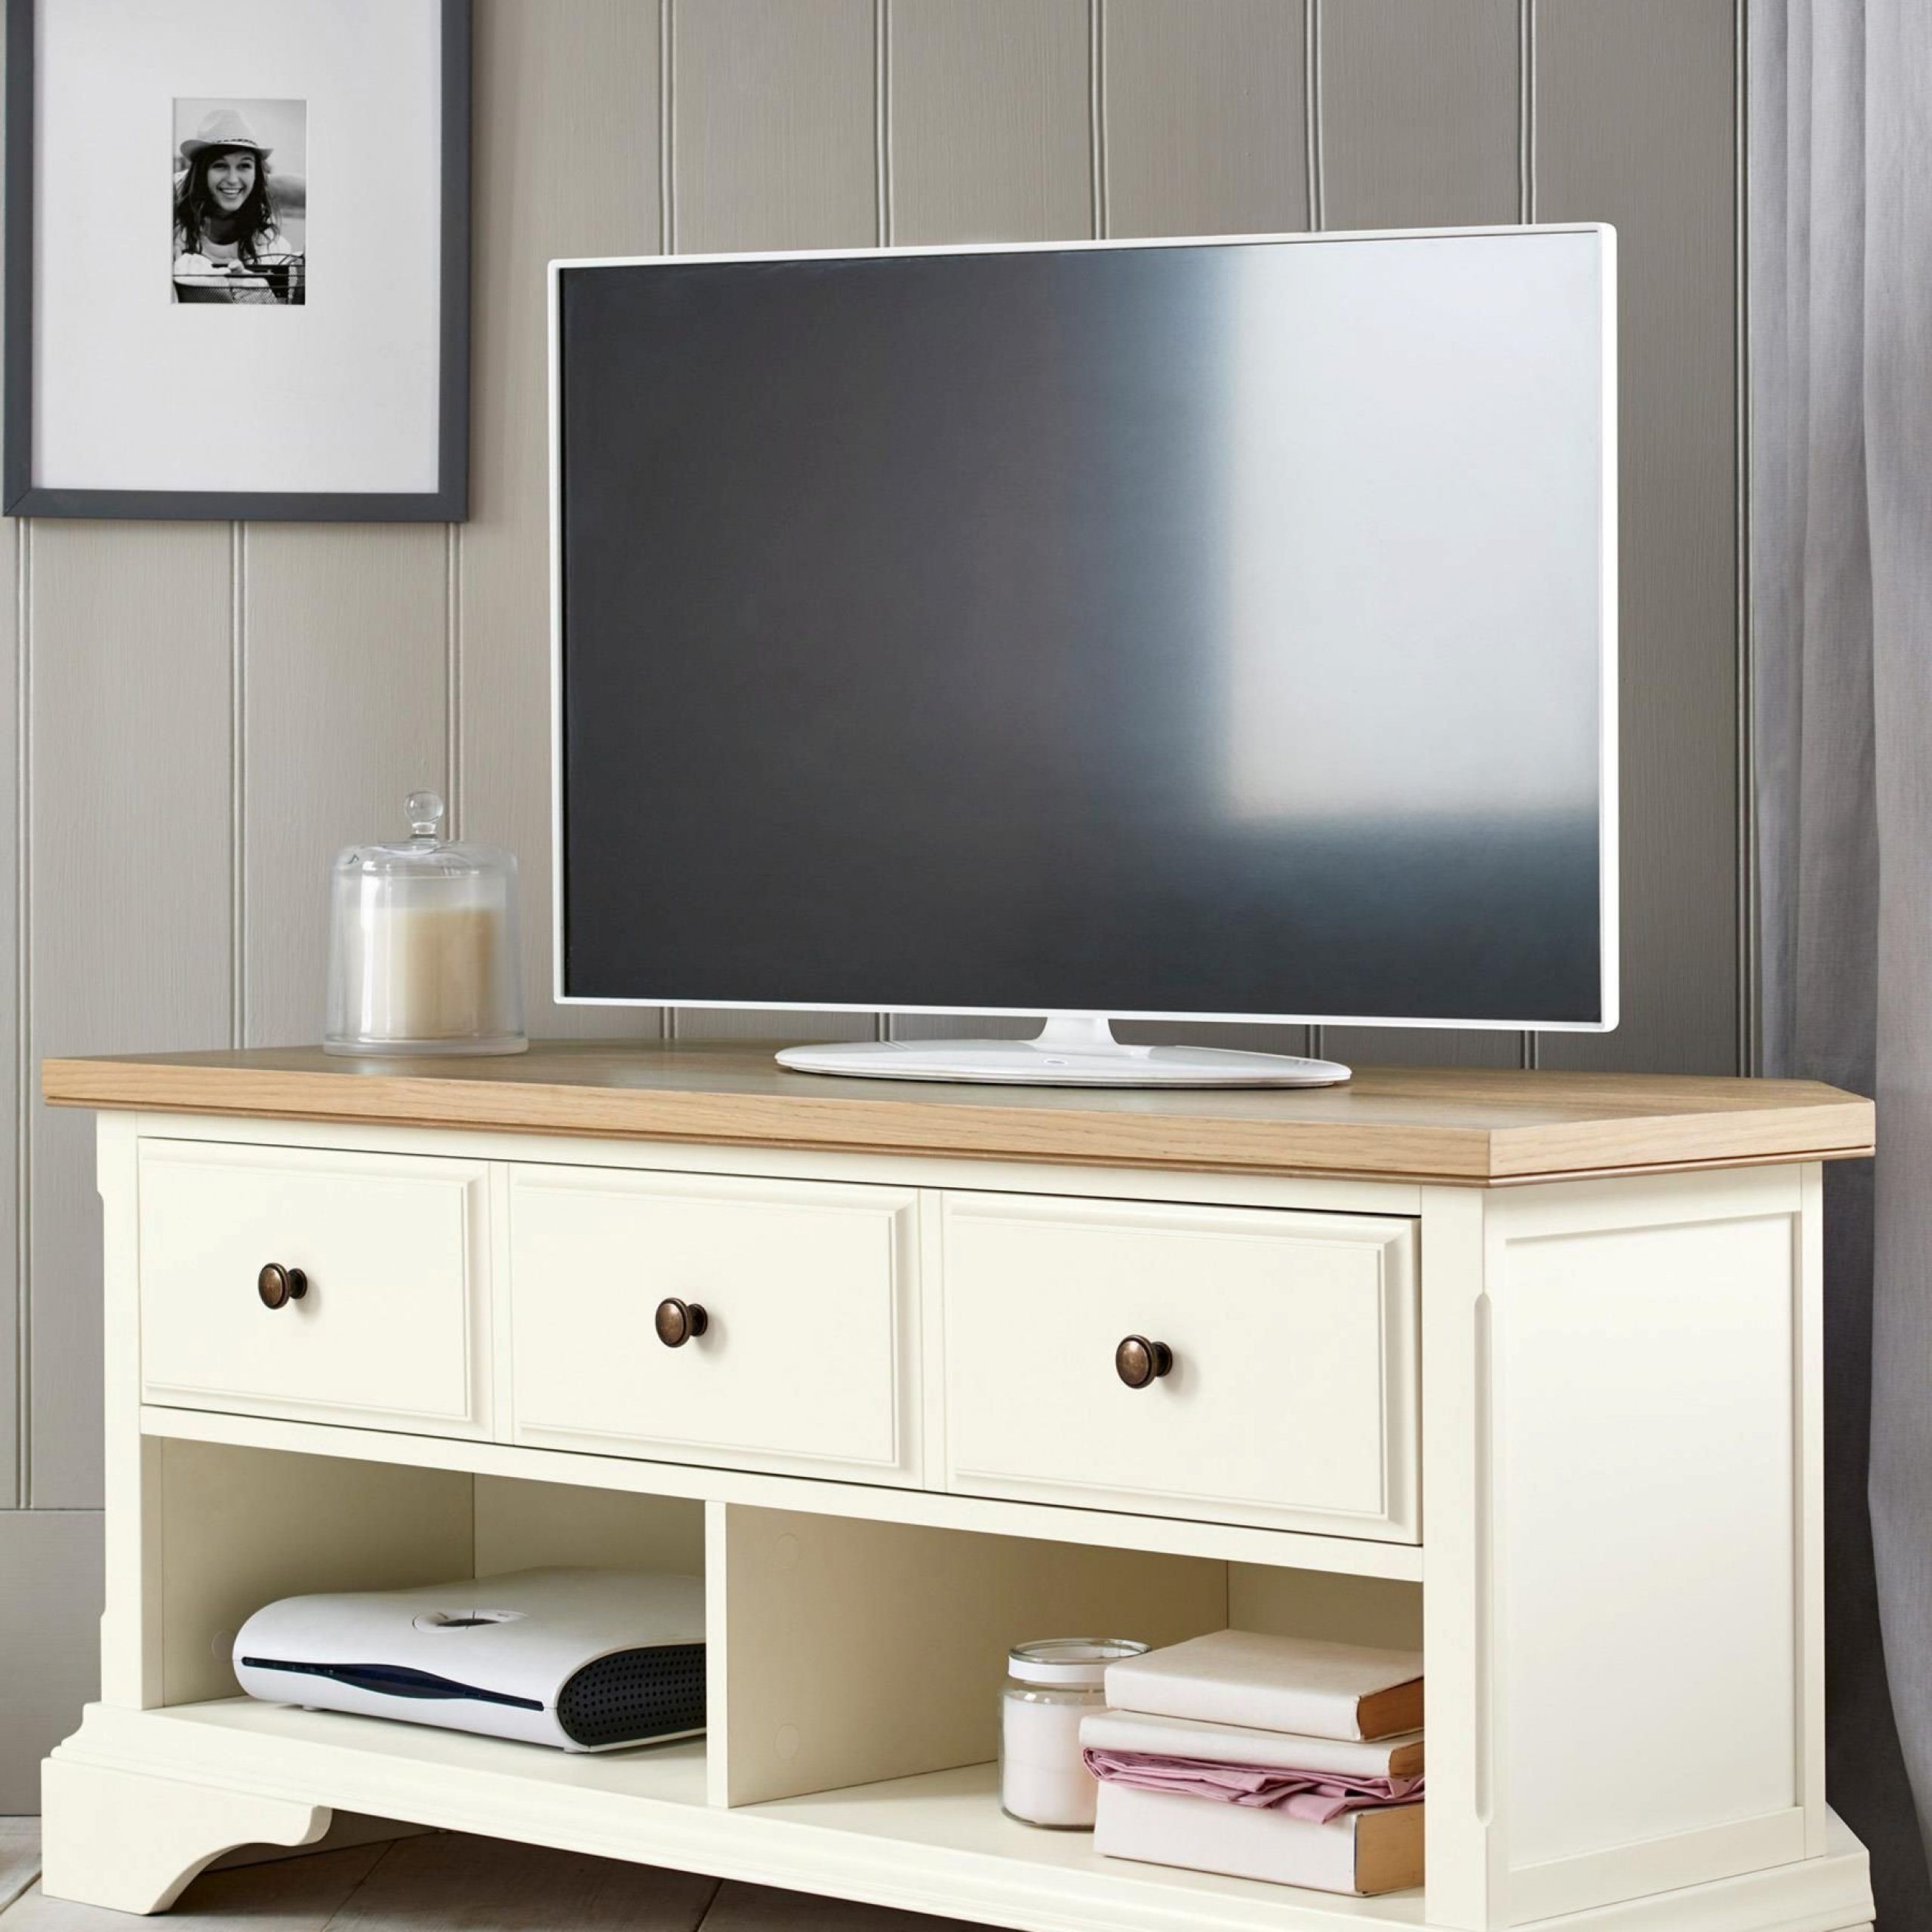 Buy Bordeaux Corner Tv Unit From The Next Uk Online Shop Intended For Cotswold Cream Tv Stands (View 12 of 15)